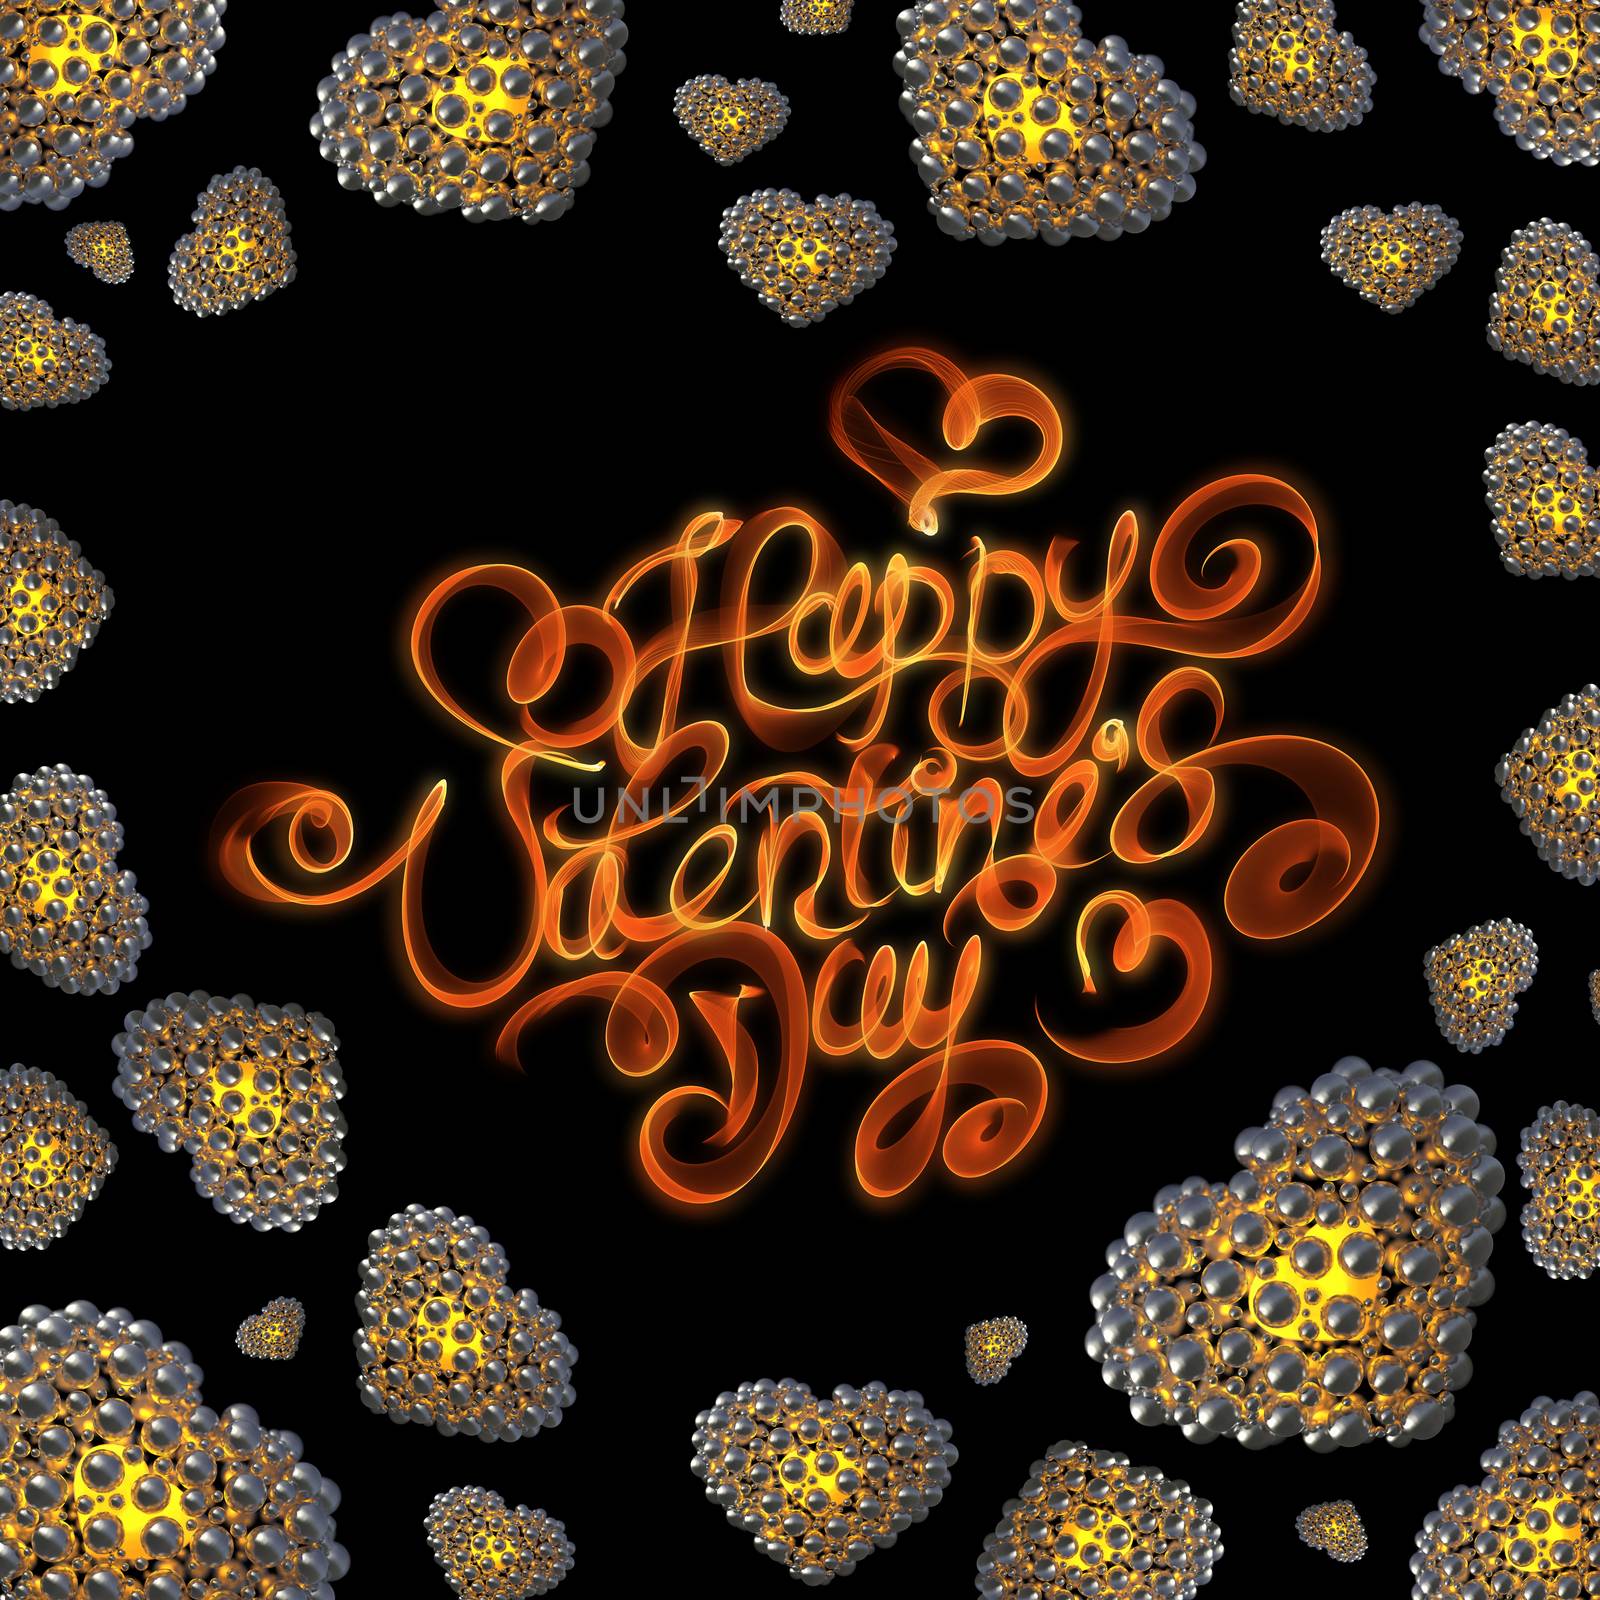 metal Gold hearts made of spheres isolated on black background. Happy valentines day lettering written by fire of smoke. 3d illustration.